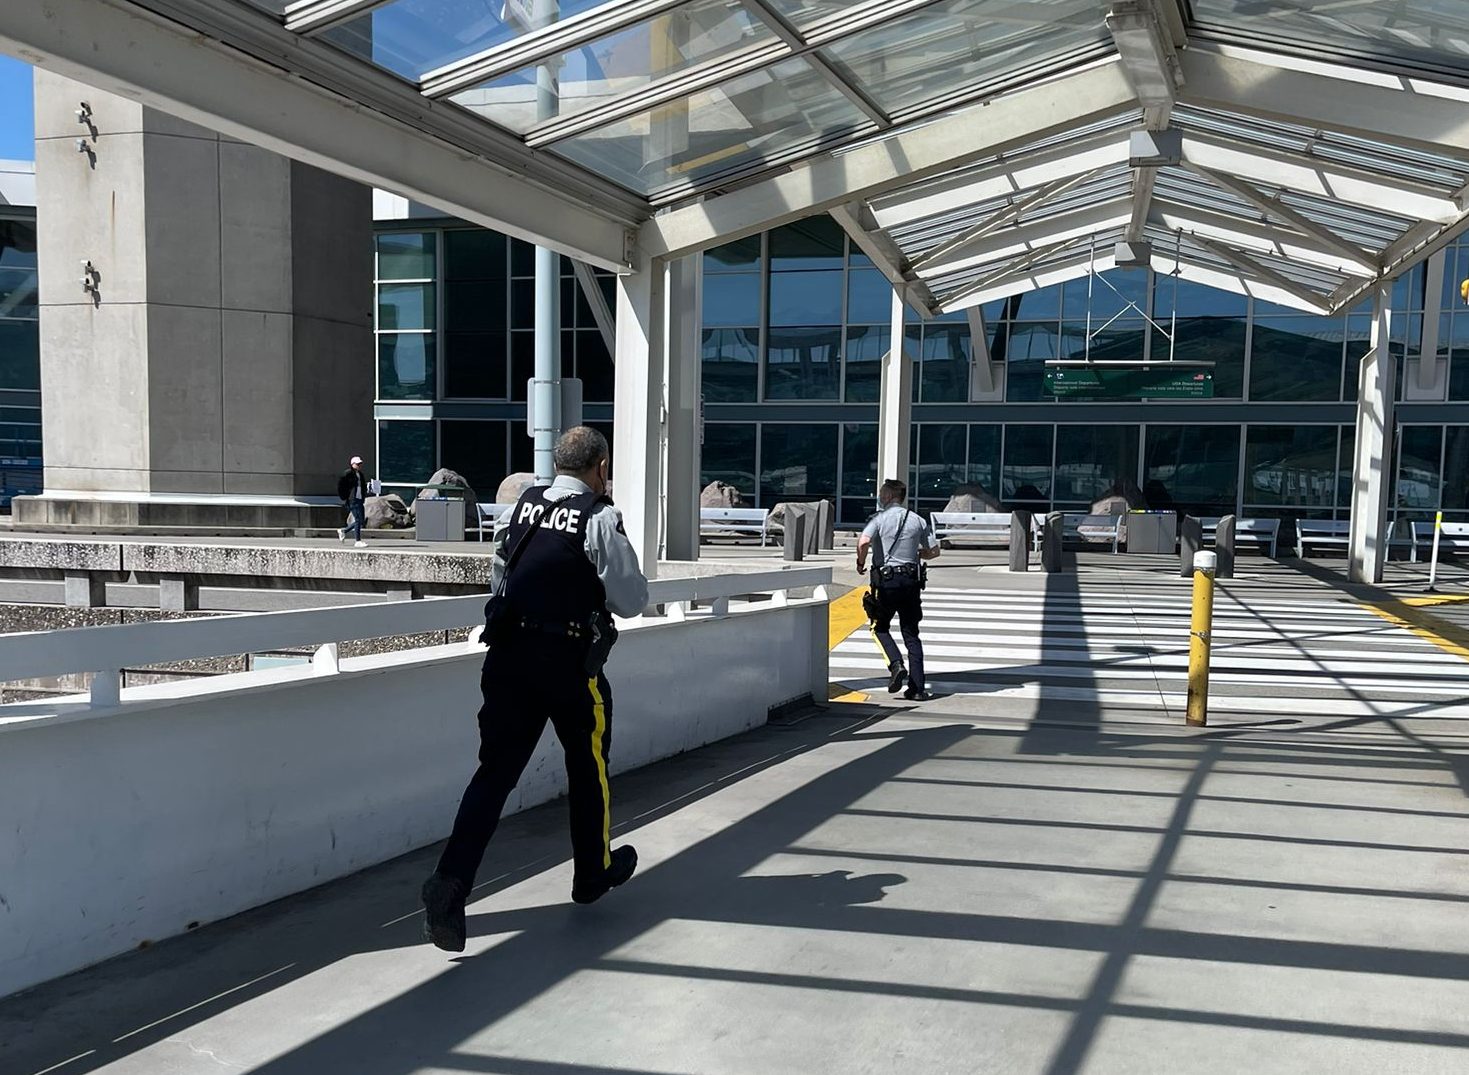 At least one dead after shooting at Vancouver airport